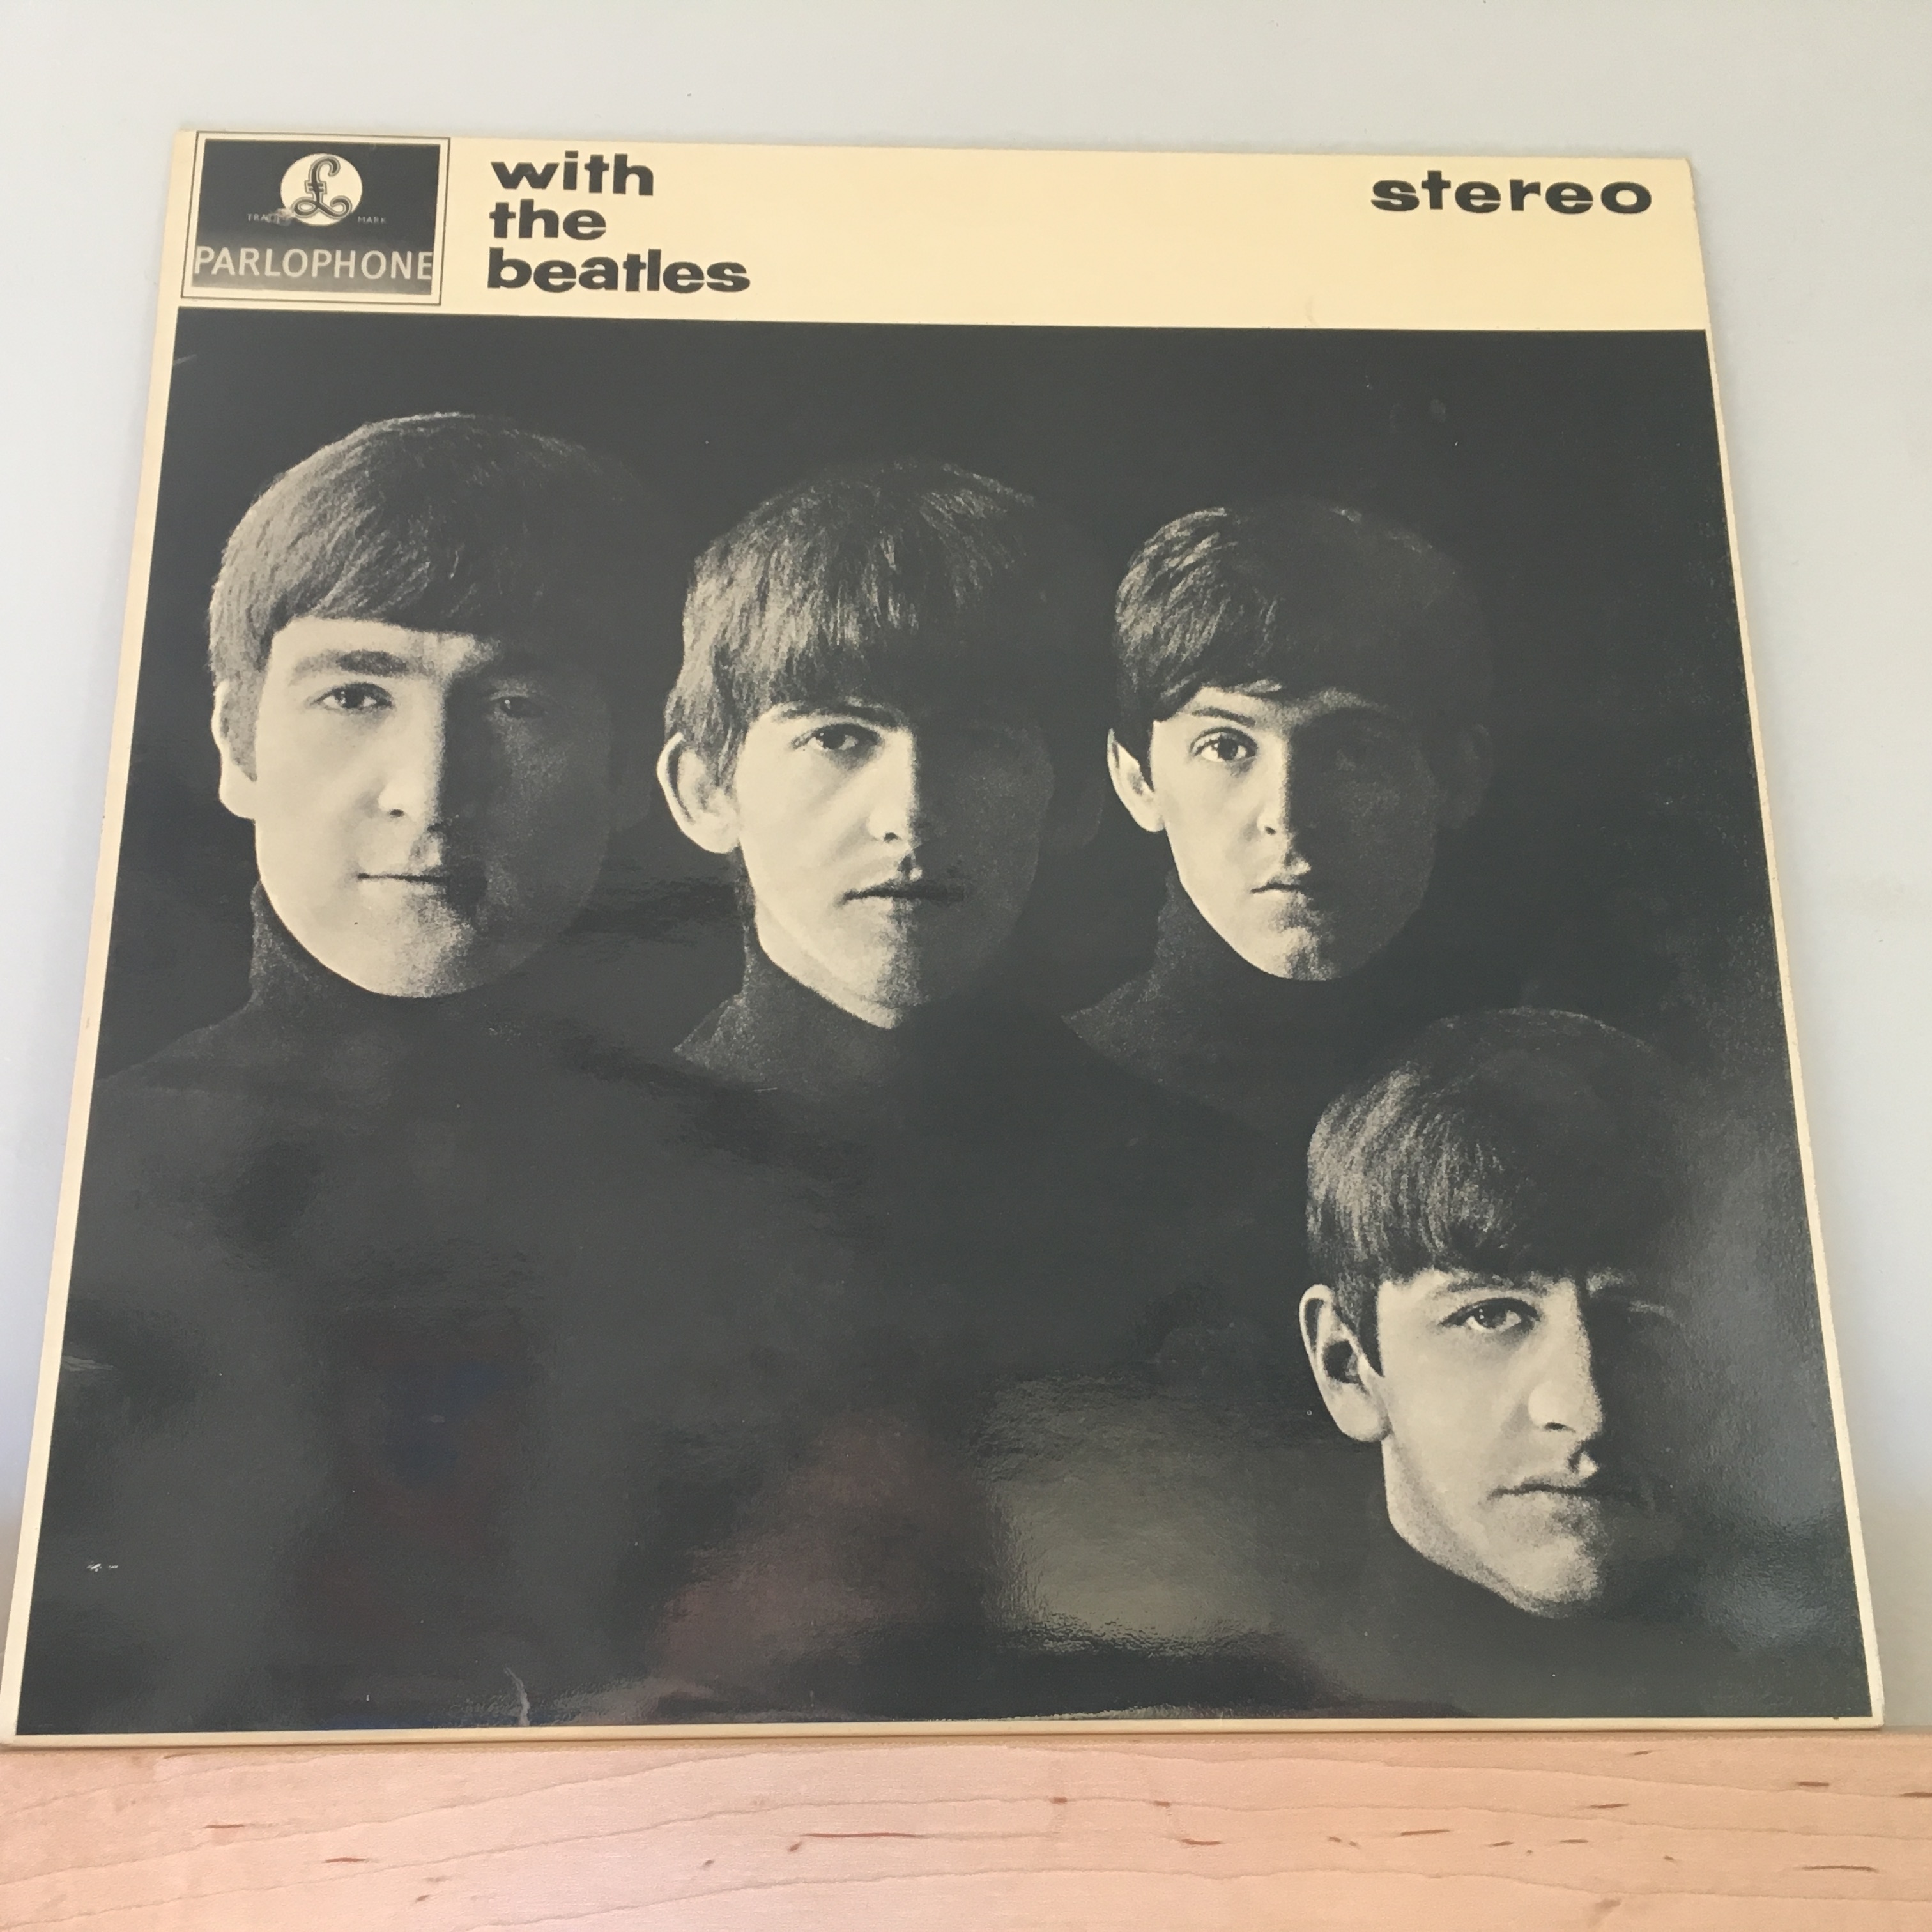 With the Beatles front cover